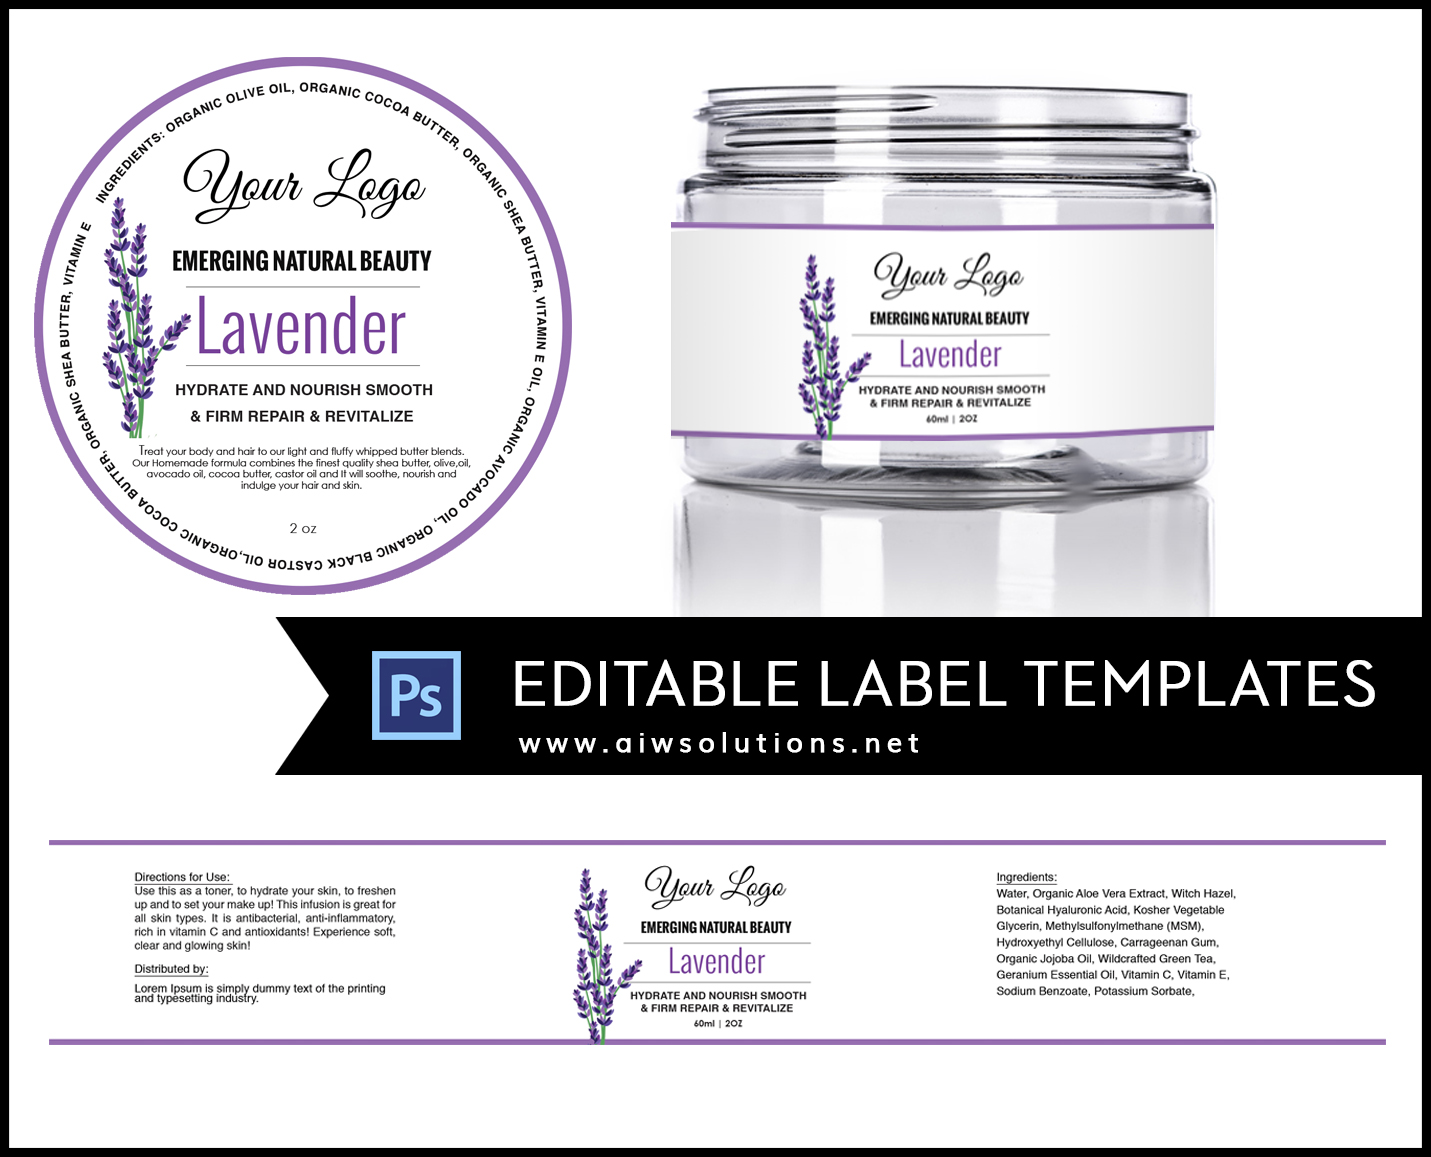 Label template ID11 | aiwsolutions